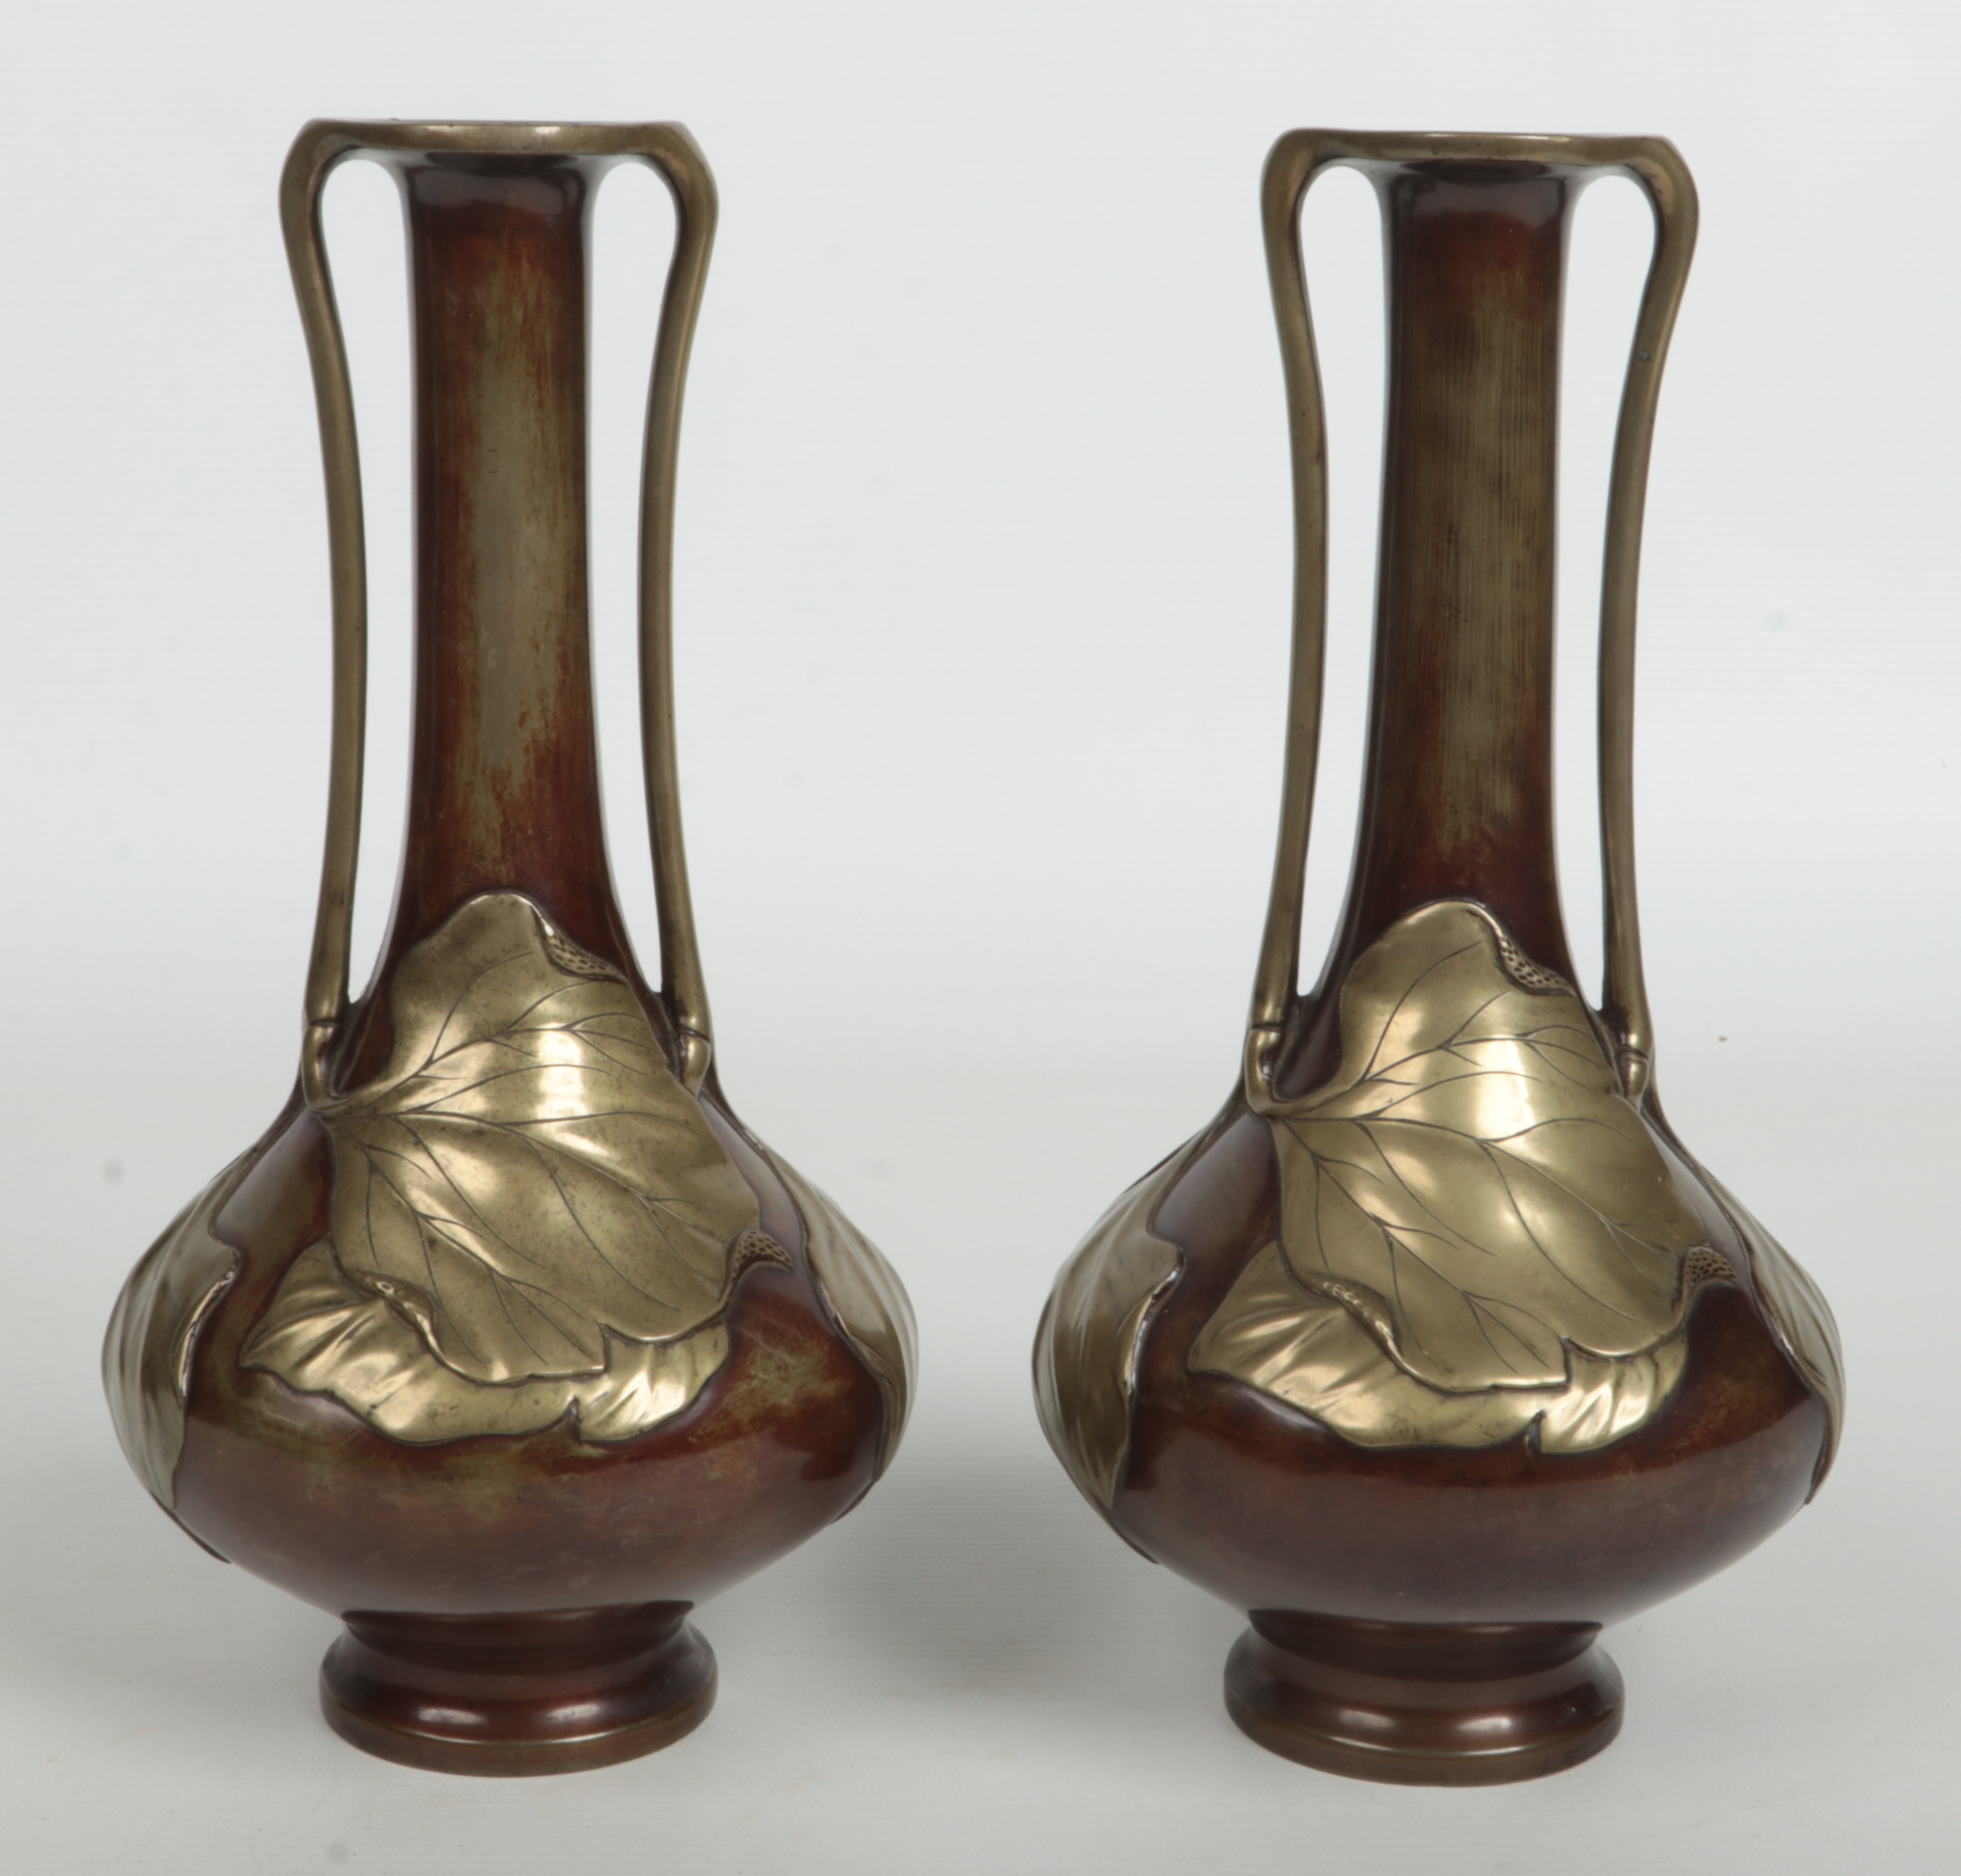 A pair of Japanese Meiji period bronze overlay twin handled vases of tall slender form. Decorated in - Image 6 of 9